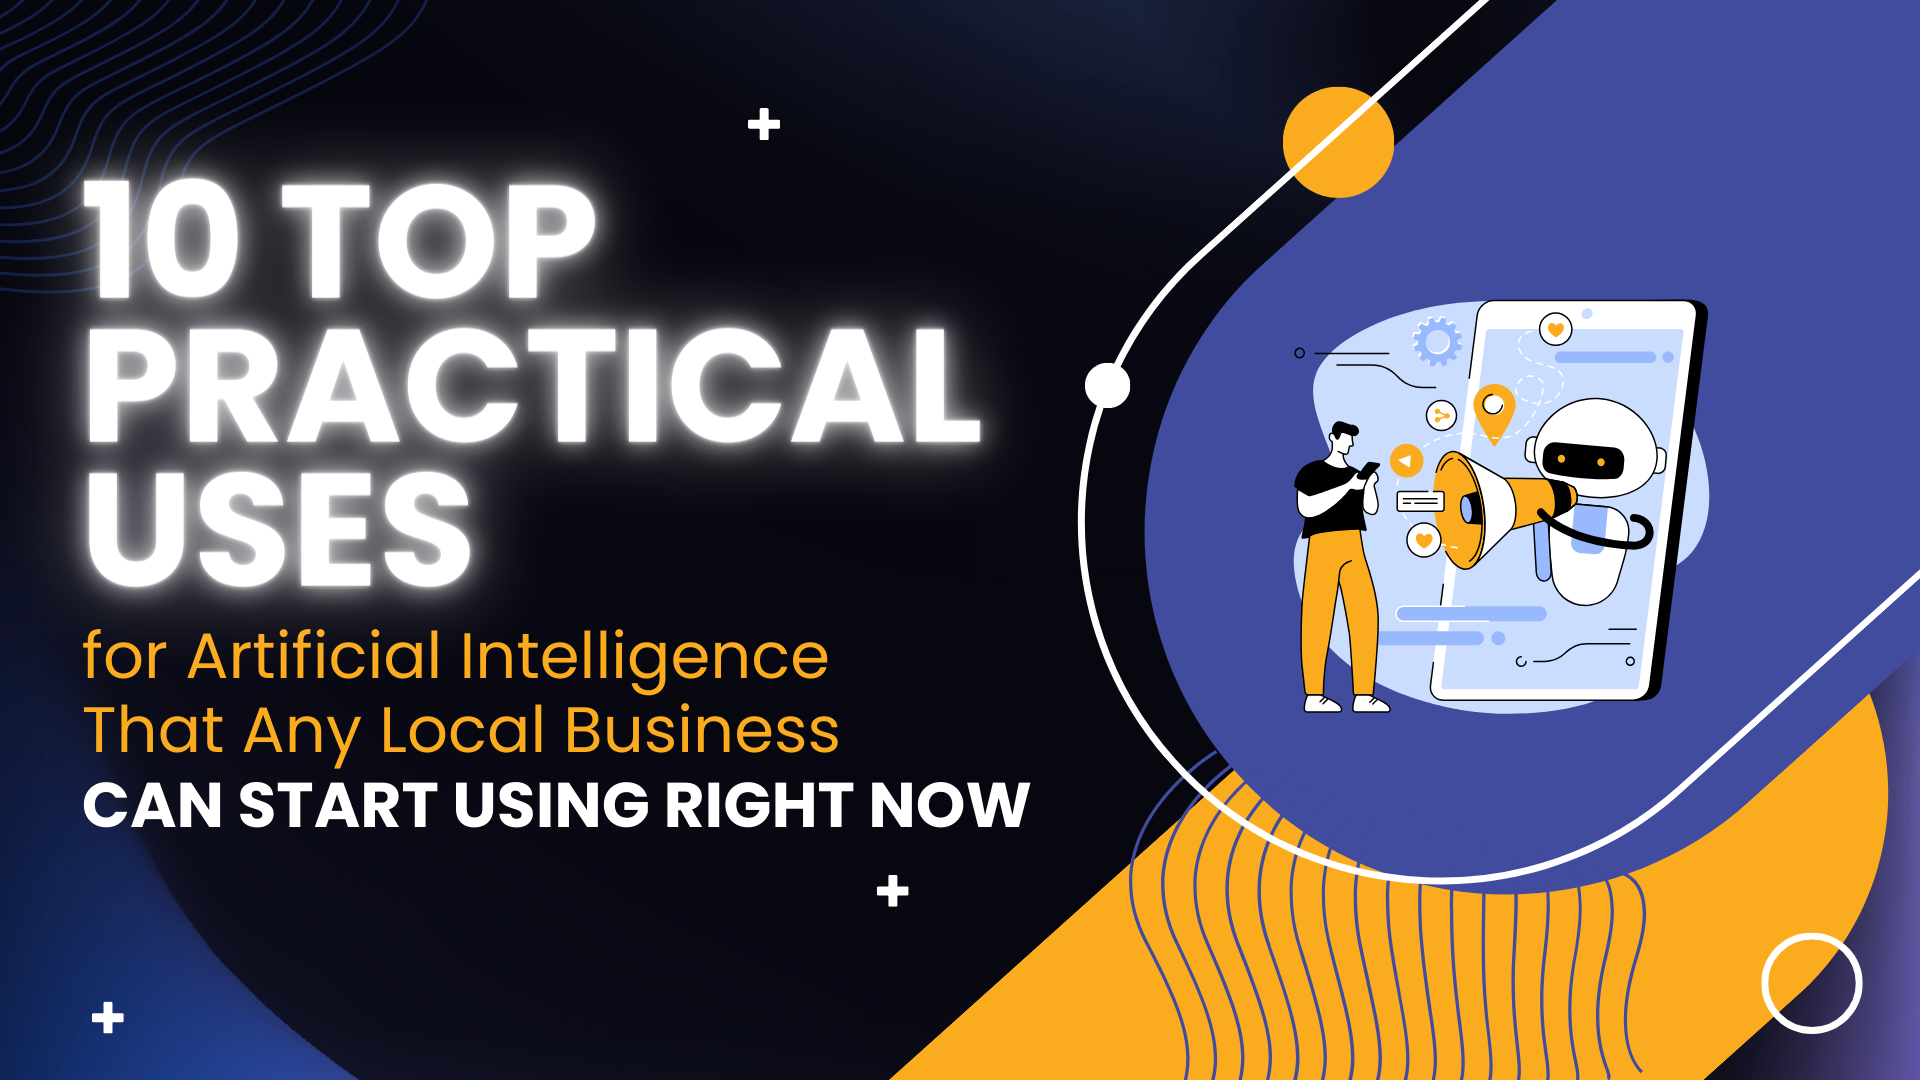 10 Top Practical Uses for Artificial Intelligence That Any Local Business Can Start Using Right Now